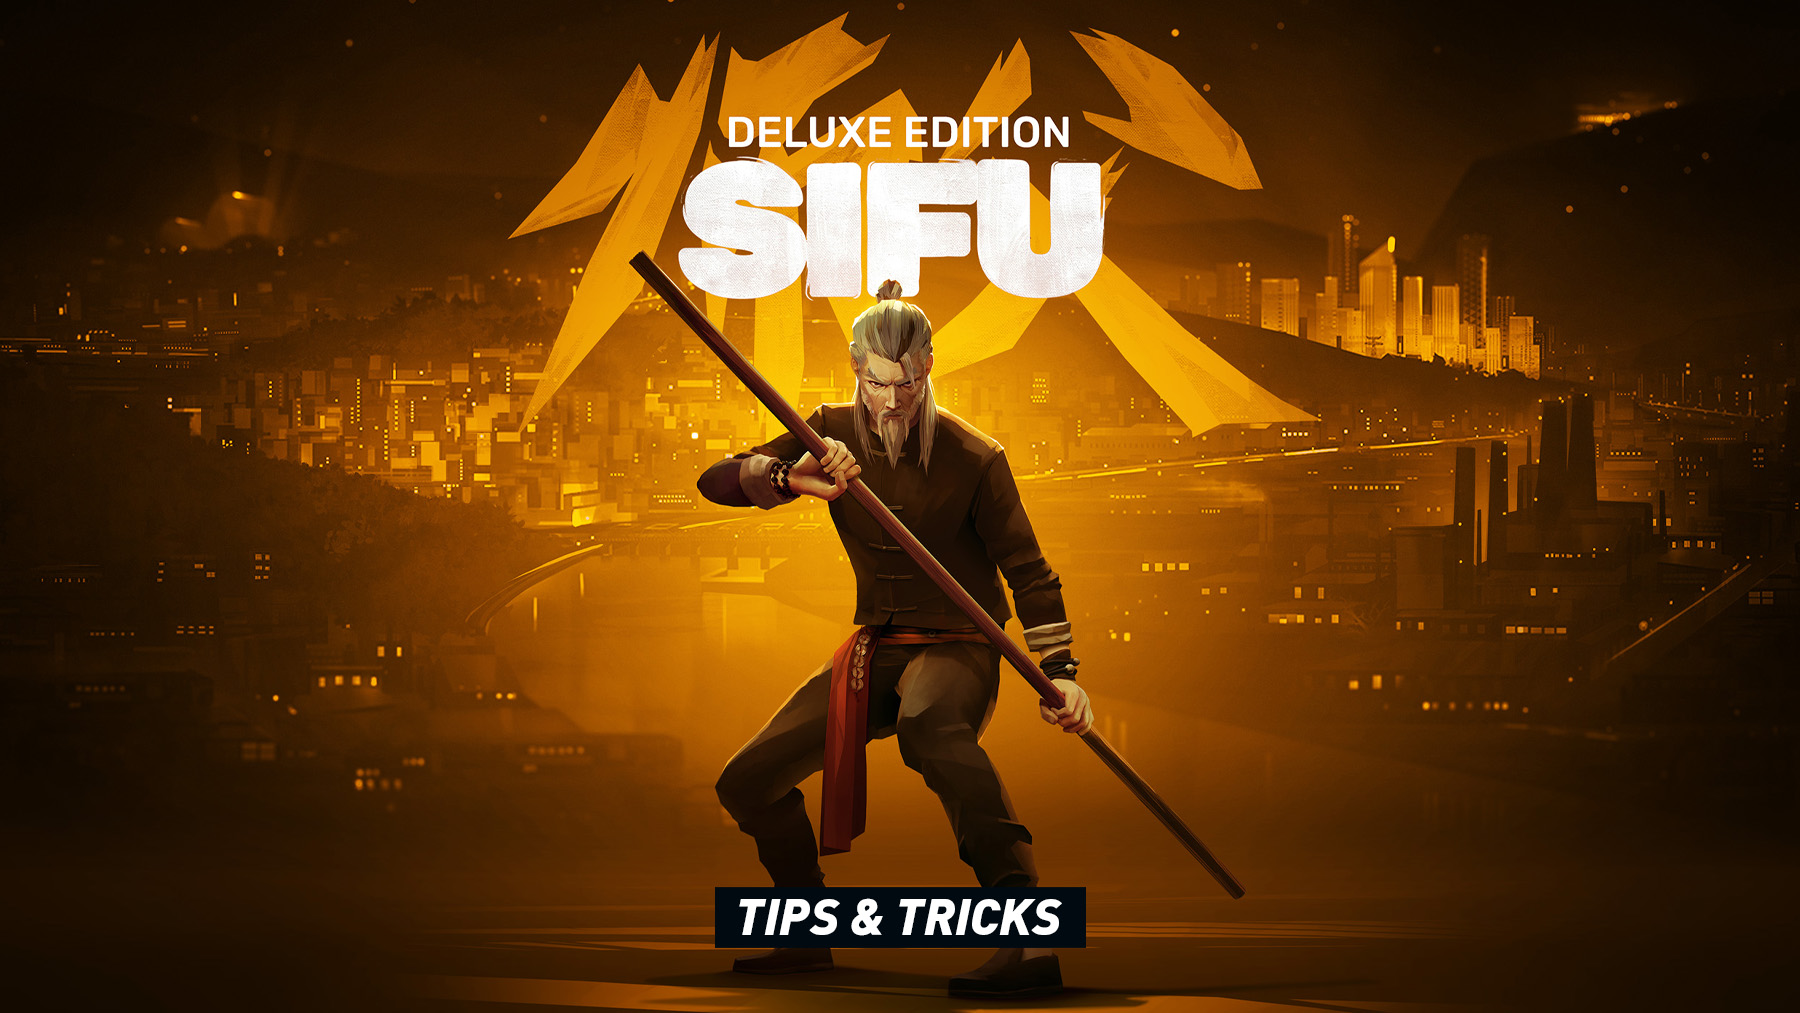 Sift – Tips and Tricks